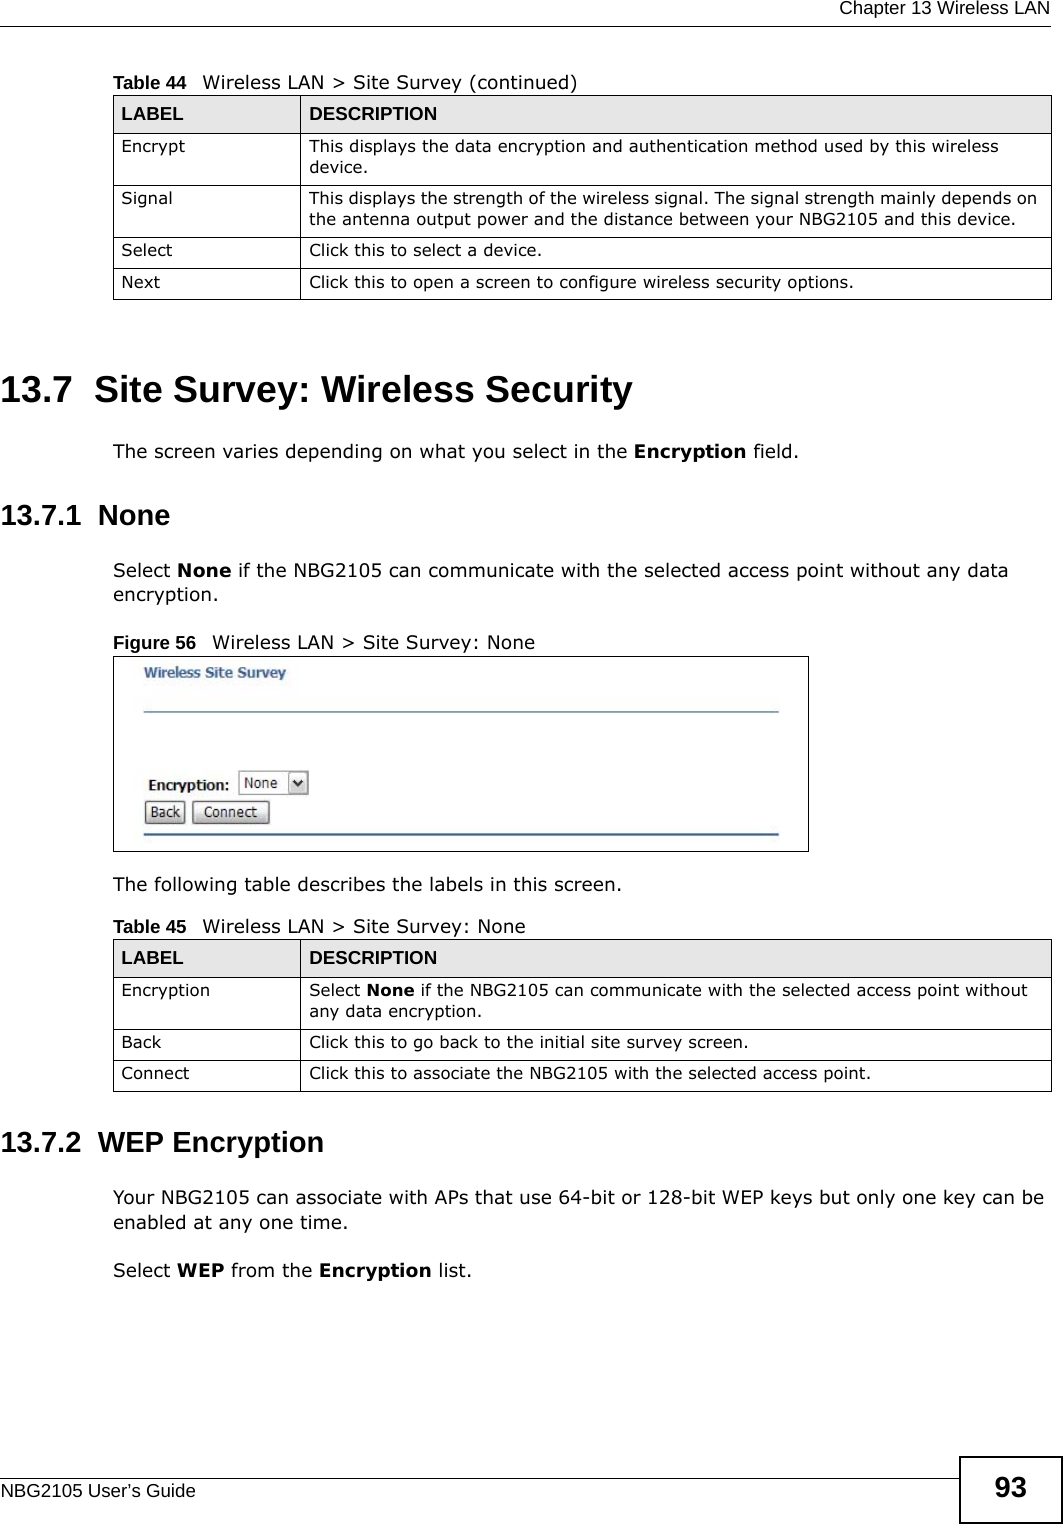  Chapter 13 Wireless LANNBG2105 User’s Guide 9313.7  Site Survey: Wireless SecurityThe screen varies depending on what you select in the Encryption field.13.7.1  NoneSelect None if the NBG2105 can communicate with the selected access point without any data encryption.Figure 56   Wireless LAN &gt; Site Survey: NoneThe following table describes the labels in this screen.13.7.2  WEP EncryptionYour NBG2105 can associate with APs that use 64-bit or 128-bit WEP keys but only one key can be enabled at any one time.Select WEP from the Encryption list.Encrypt This displays the data encryption and authentication method used by this wireless device.Signal This displays the strength of the wireless signal. The signal strength mainly depends on the antenna output power and the distance between your NBG2105 and this device.Select Click this to select a device.Next Click this to open a screen to configure wireless security options.Table 44   Wireless LAN &gt; Site Survey (continued)LABEL DESCRIPTIONTable 45   Wireless LAN &gt; Site Survey: NoneLABEL DESCRIPTIONEncryption Select None if the NBG2105 can communicate with the selected access point without any data encryption.Back Click this to go back to the initial site survey screen.Connect Click this to associate the NBG2105 with the selected access point.